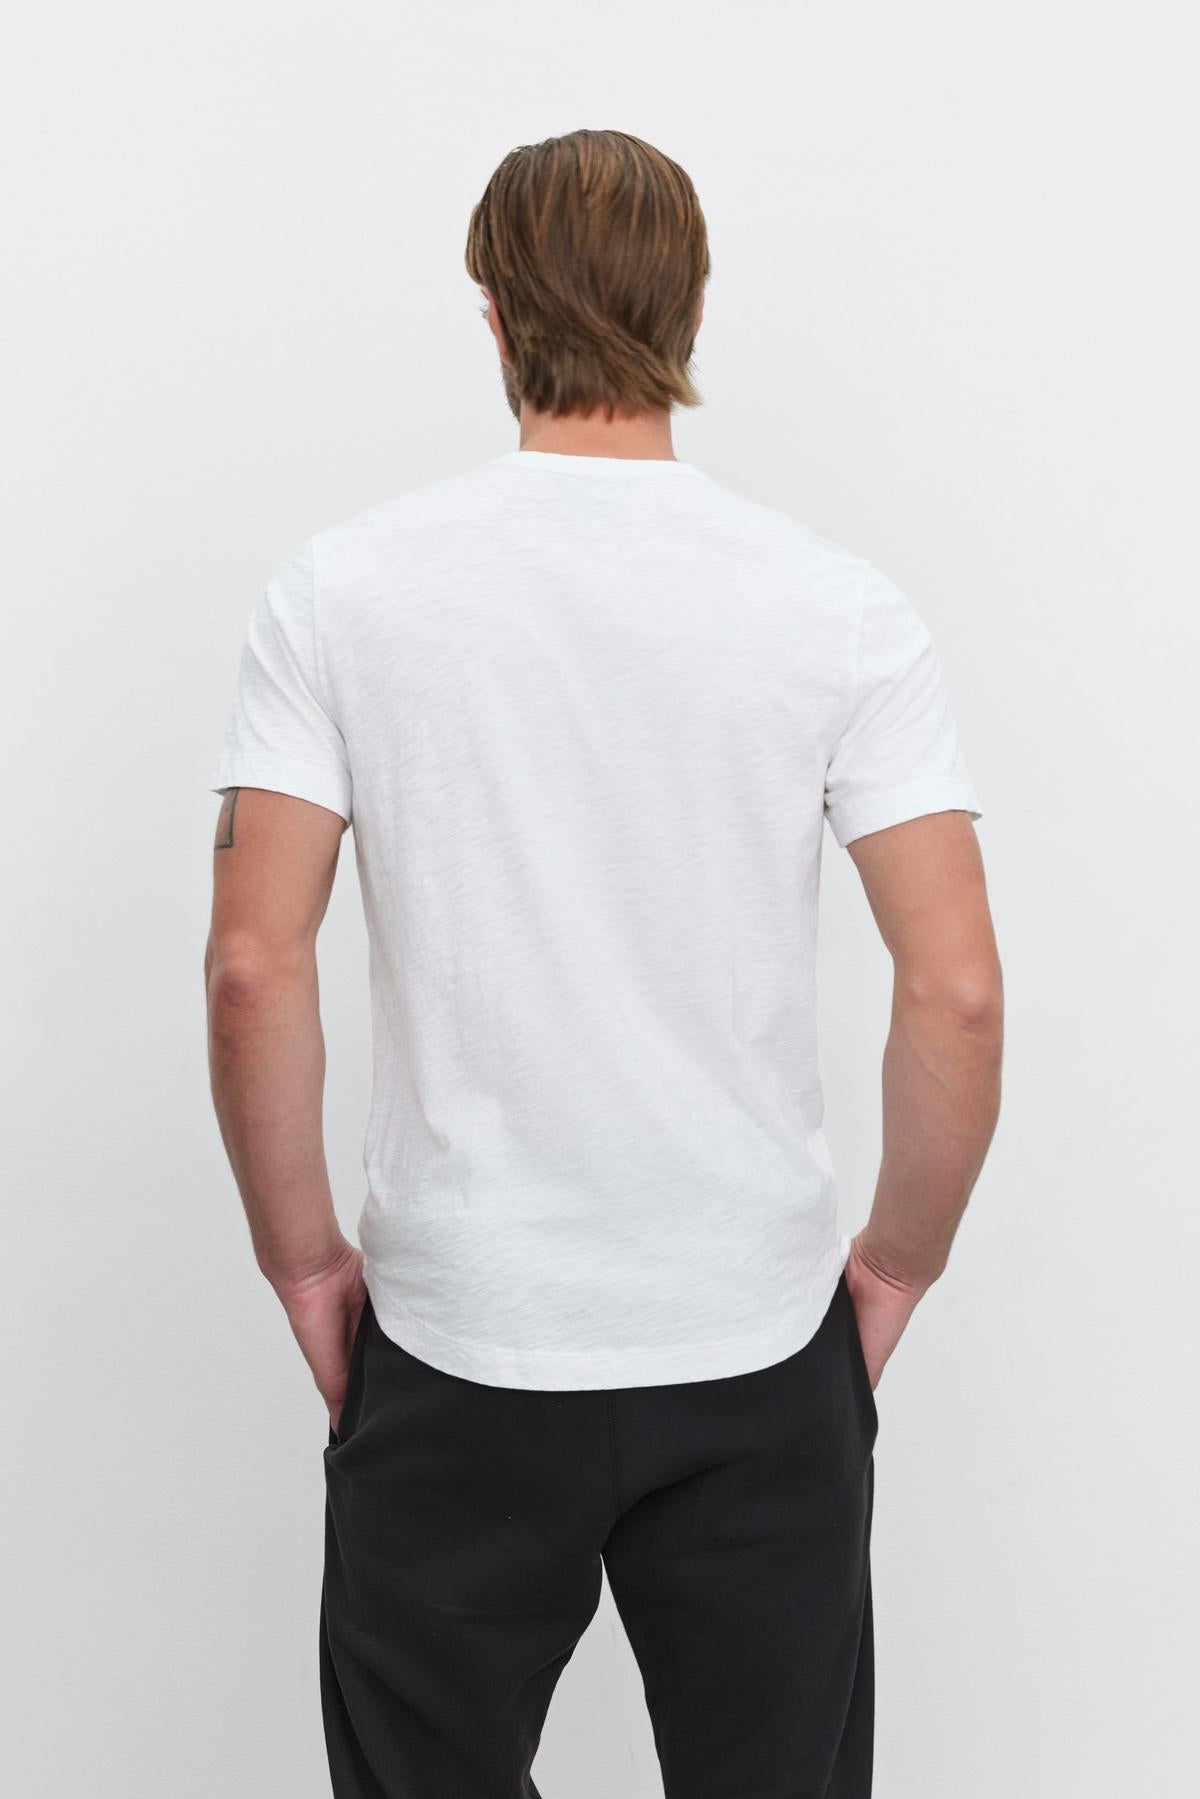 Man standing with his back to the camera wearing a white crew neck AMARO TEE with a heathered texture and black pants by Velvet by Graham & Spencer.-35867457585345